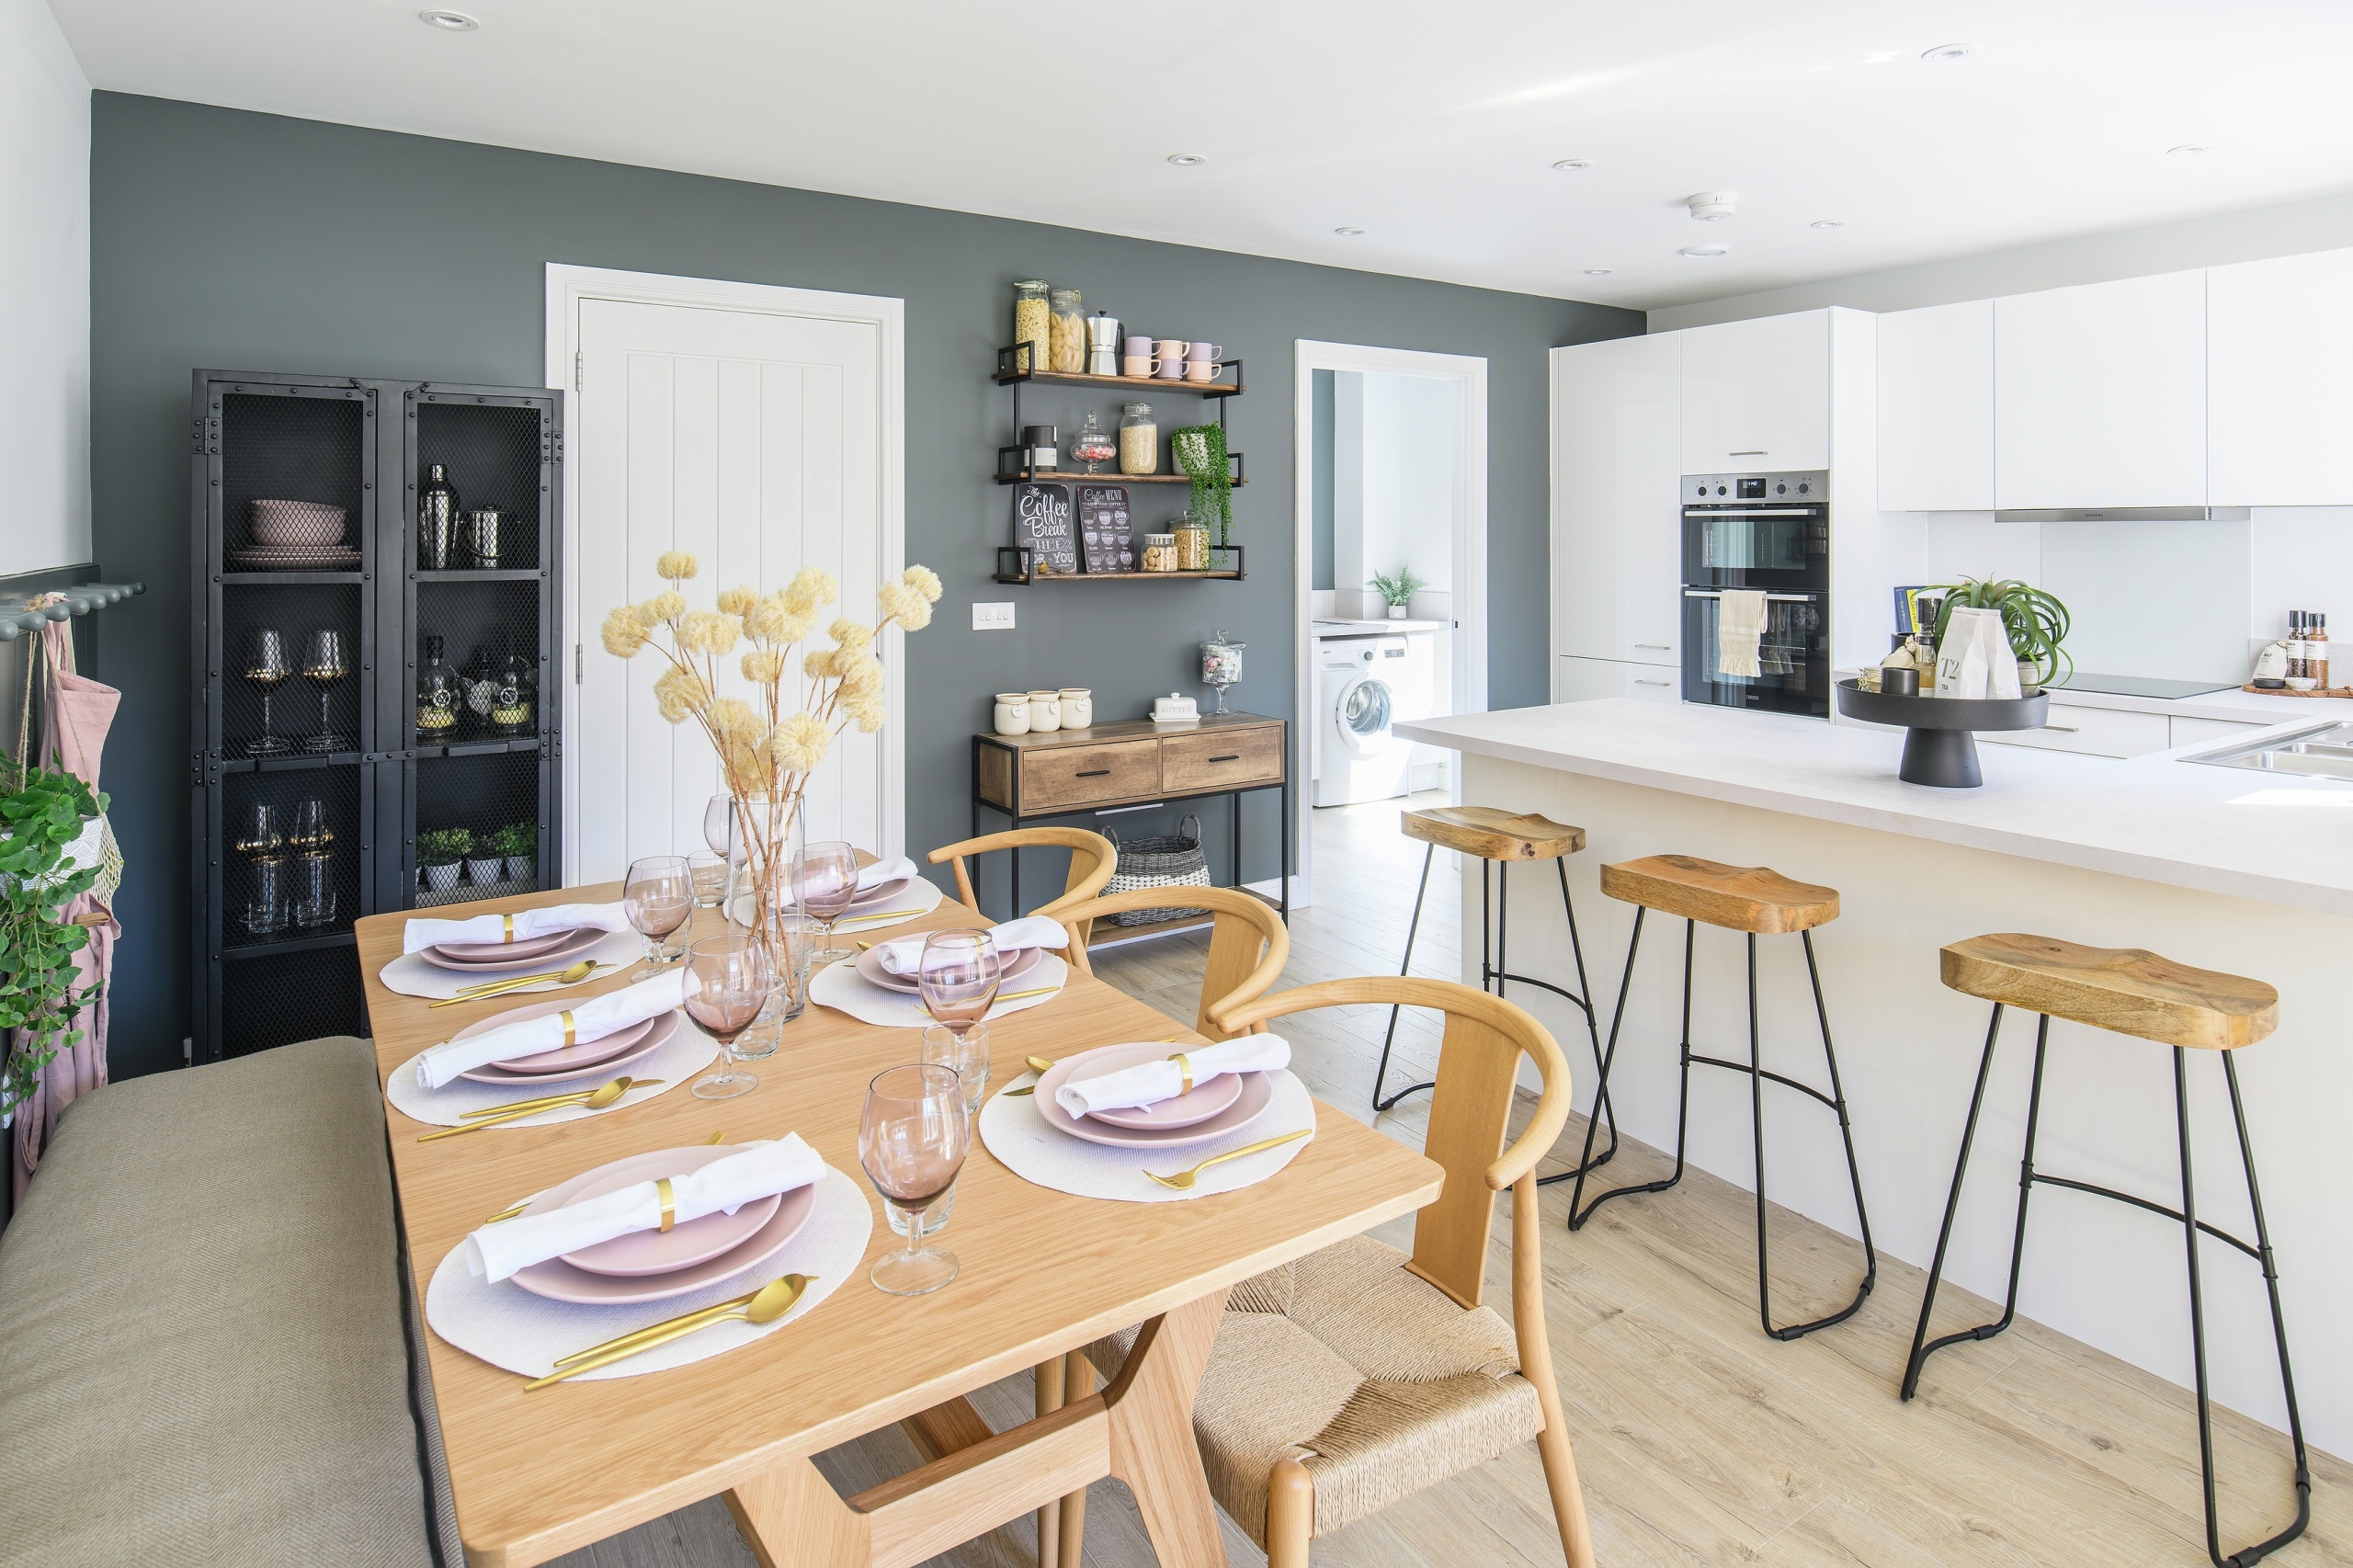 A kitchen dining area that uses white cabinets and lots of wooden furniture such as the dinner table